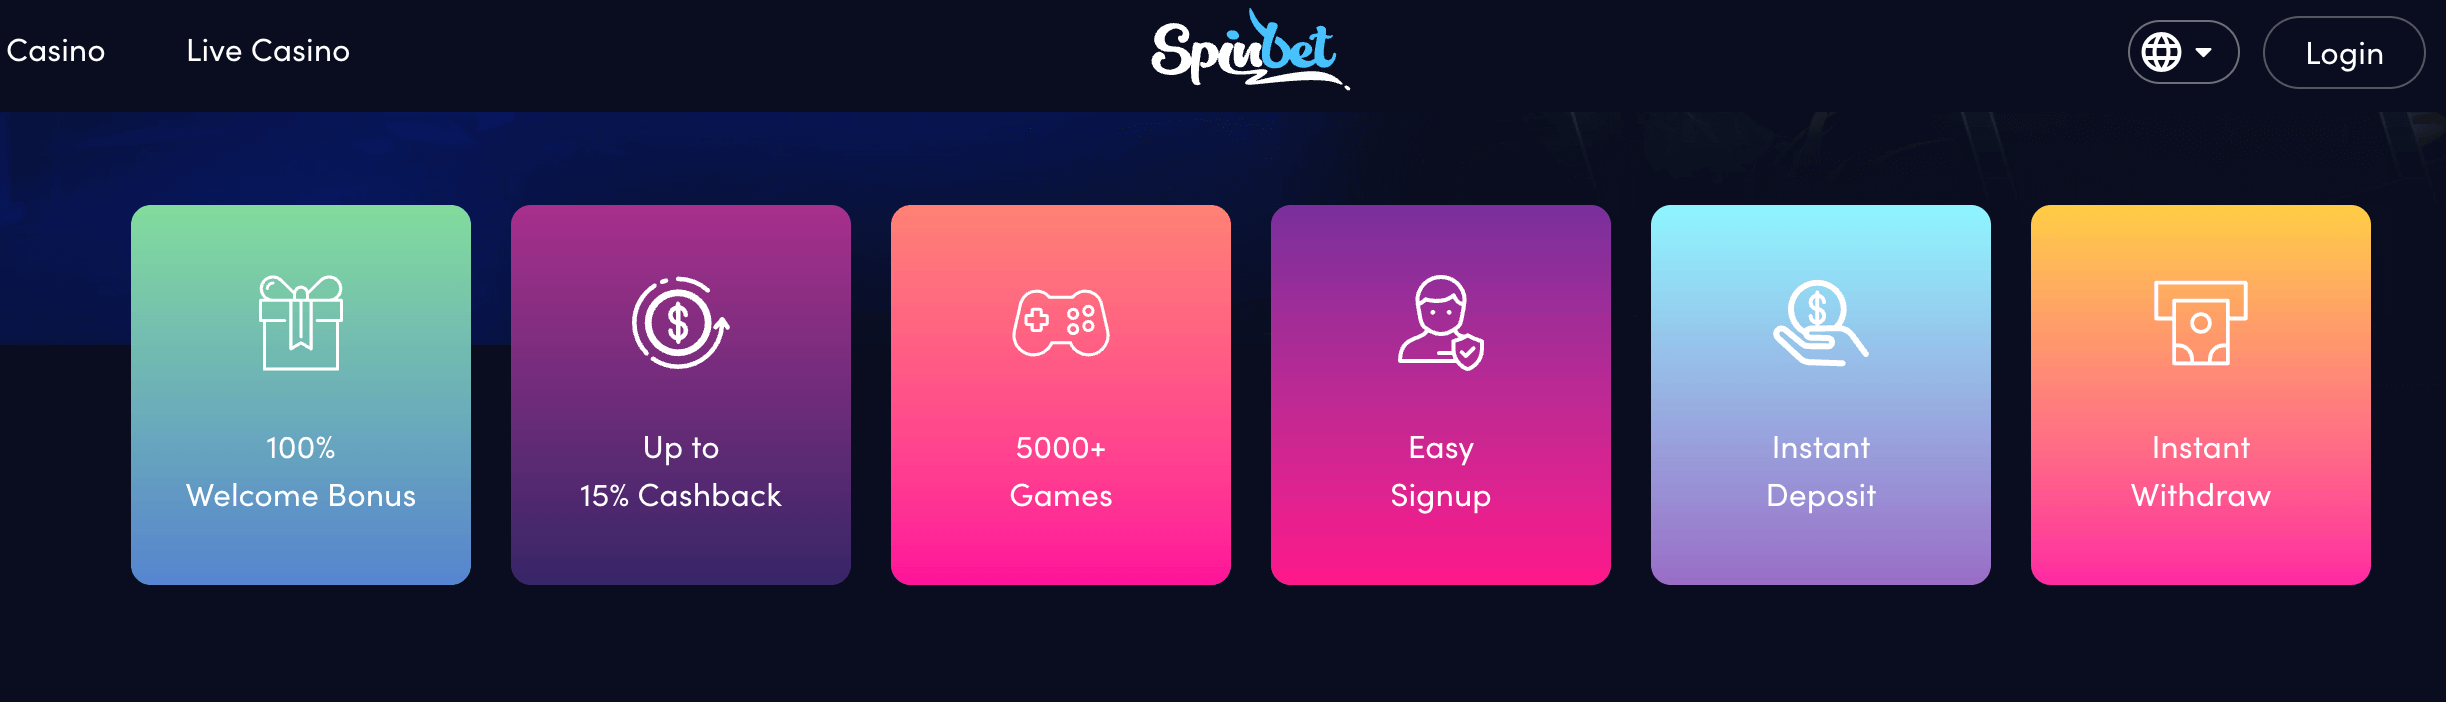 spinbit casino - home page